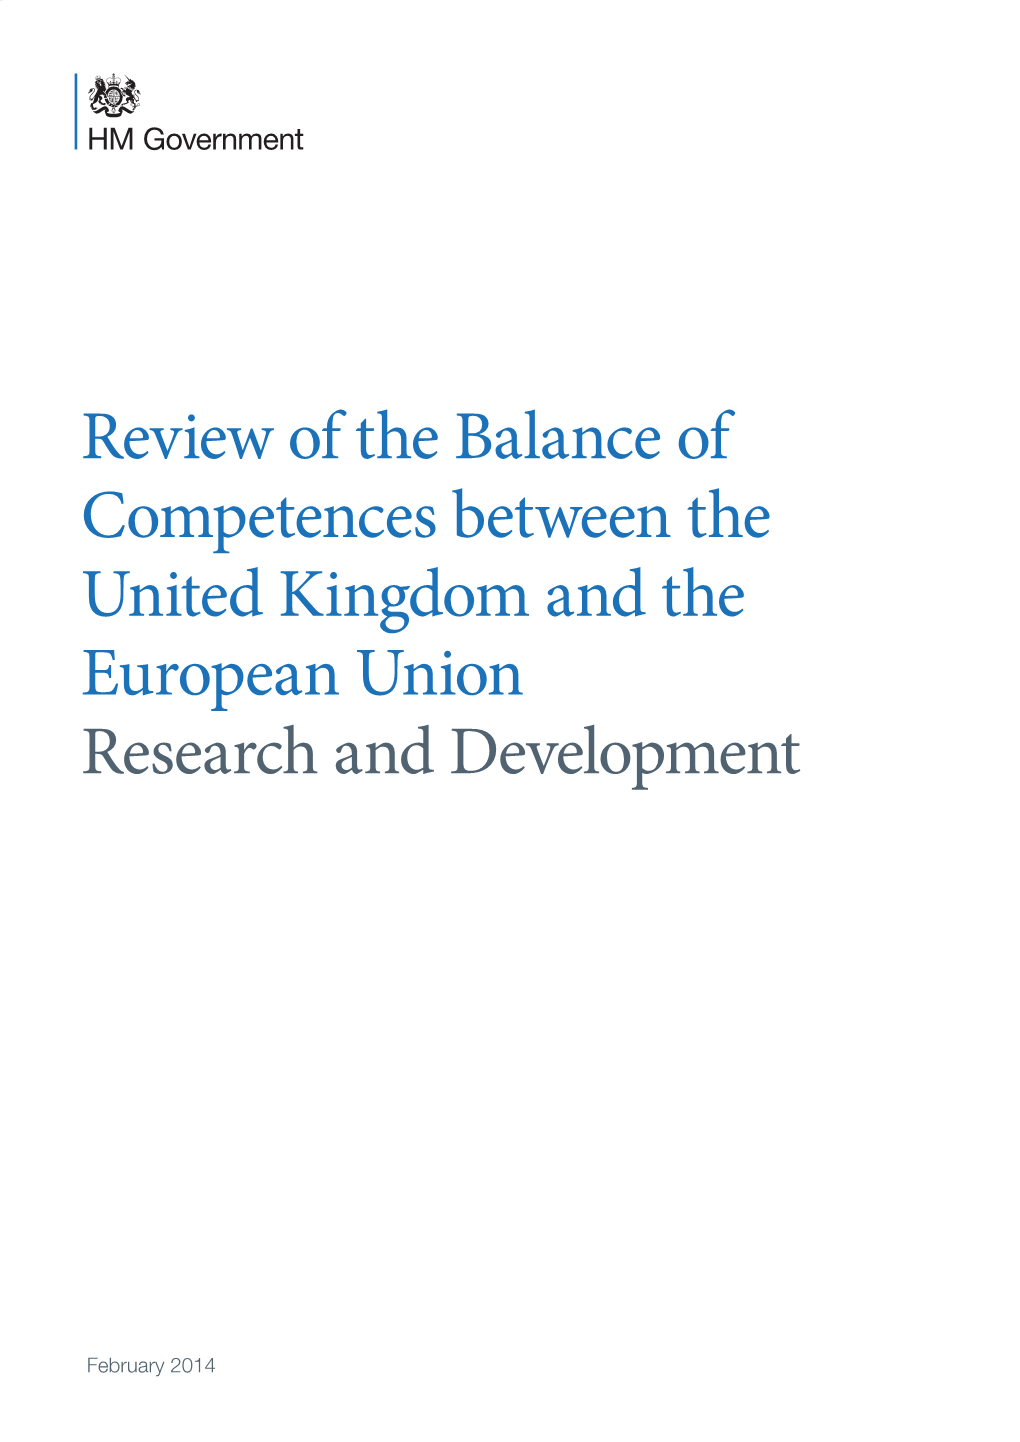 Review of the Balance of Competences | Research And